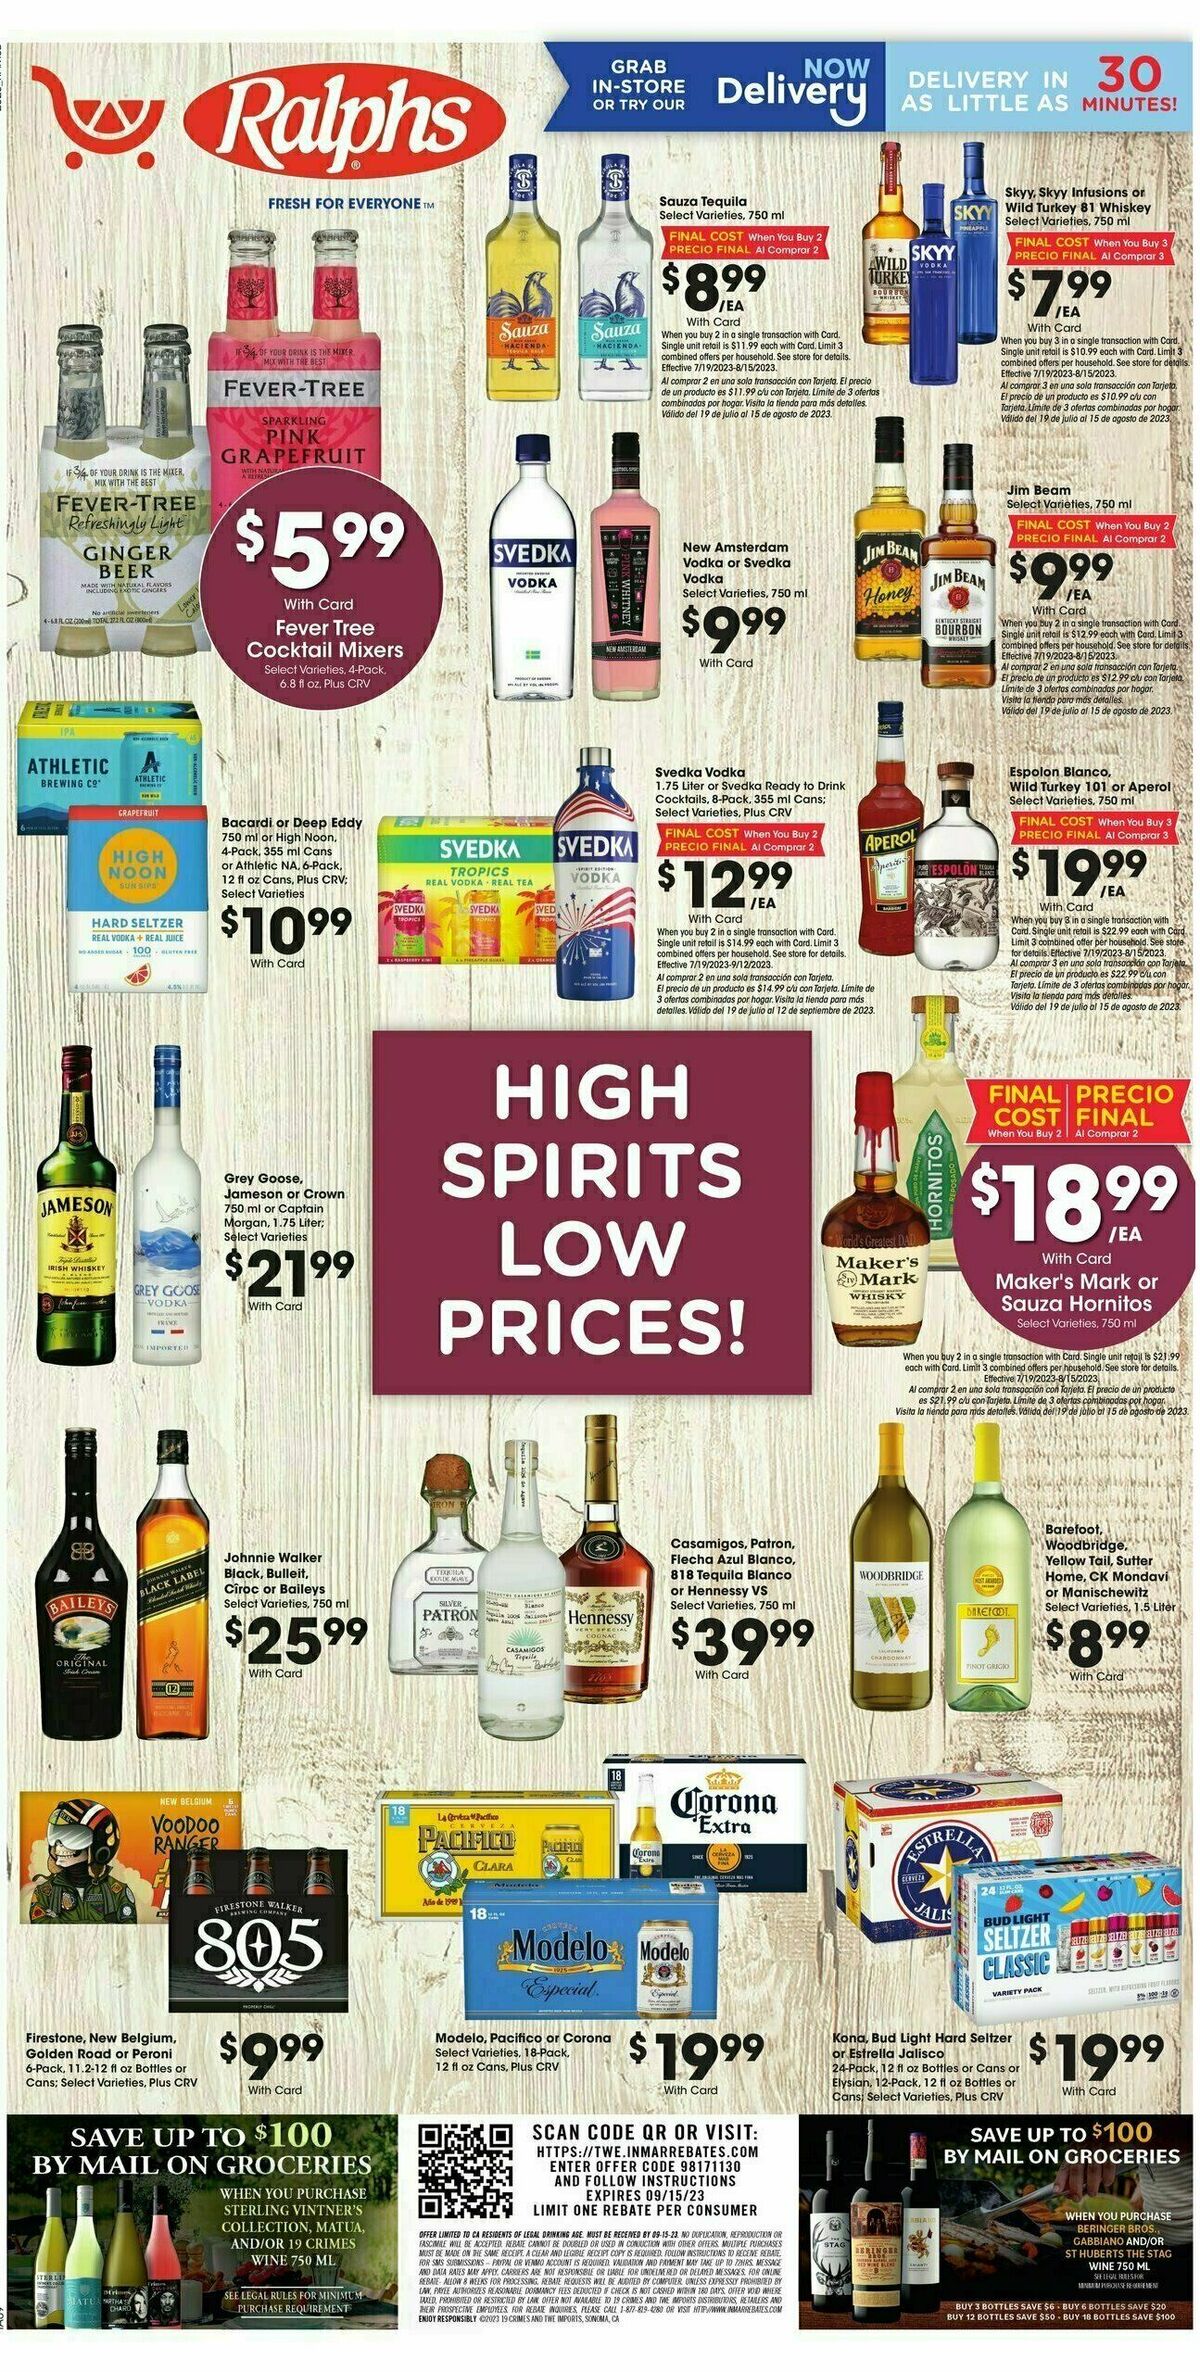 Ralphs High Spirits Low Prices Weekly Ad from July 19